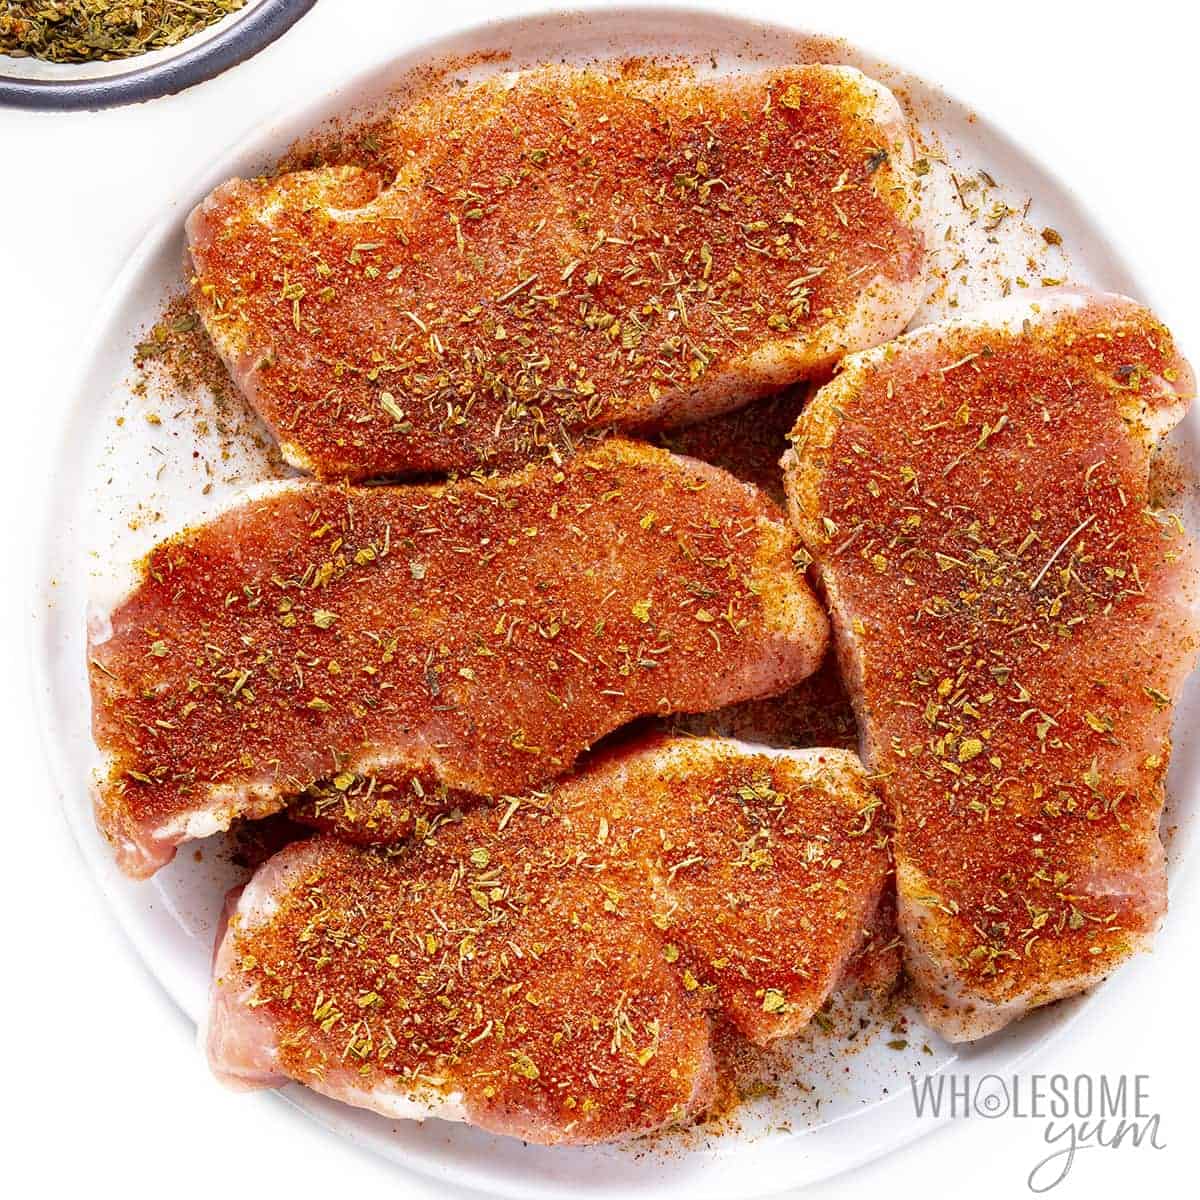 Pork chops with dry rub on a plate